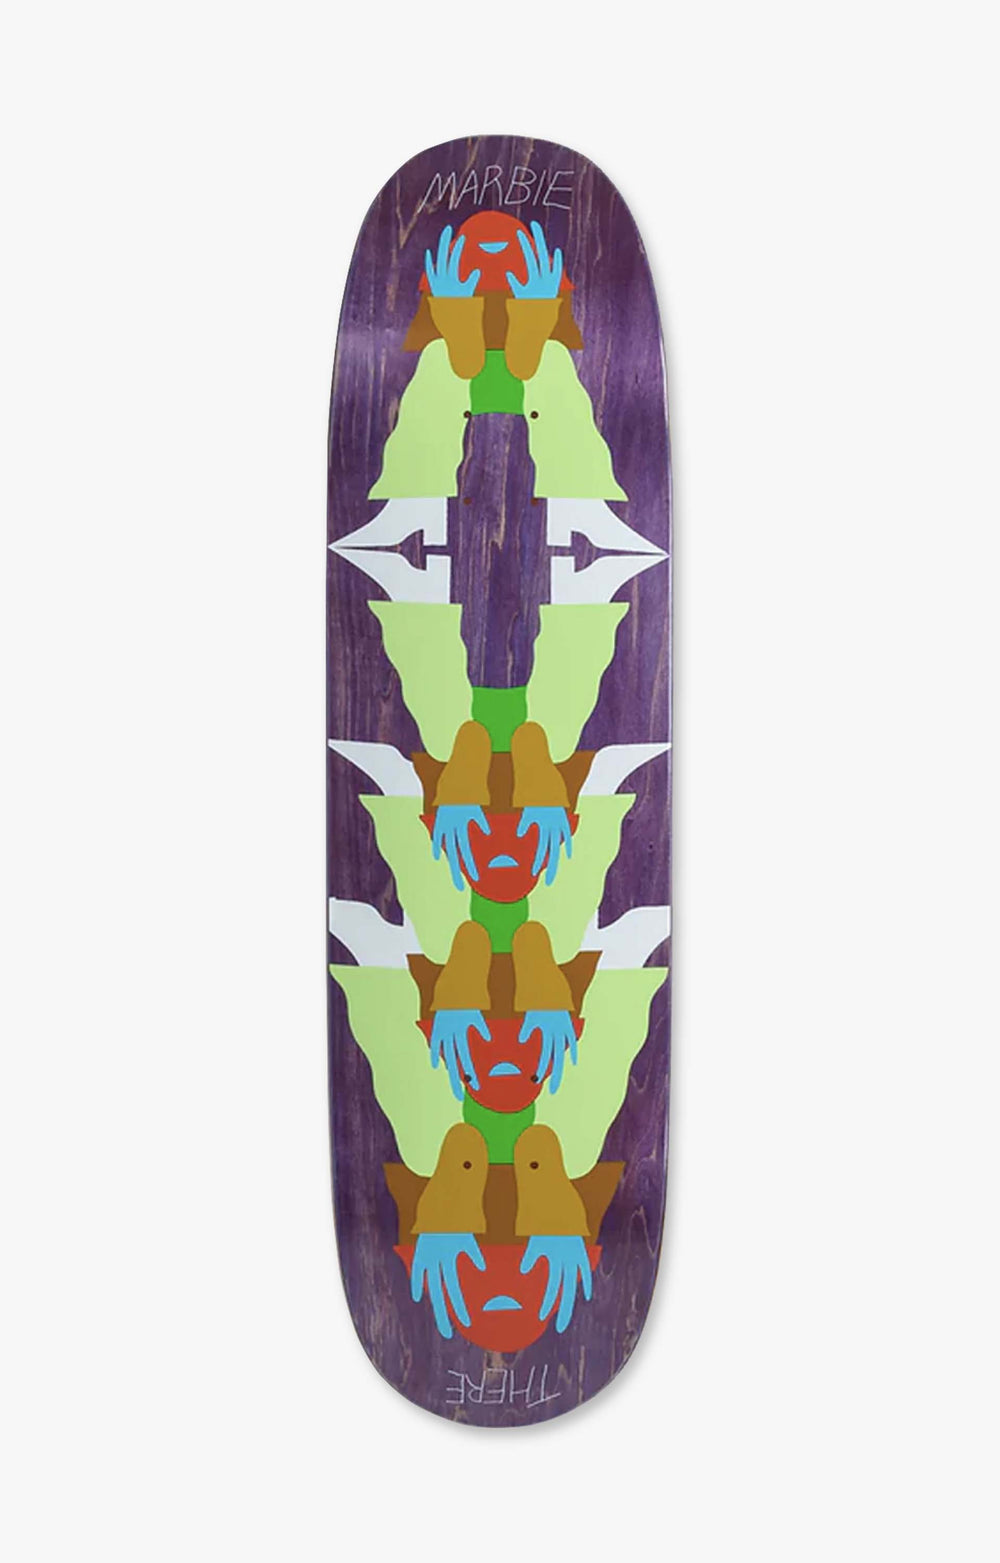 There Marbie Reflect Skateboard Deck, 8.5"